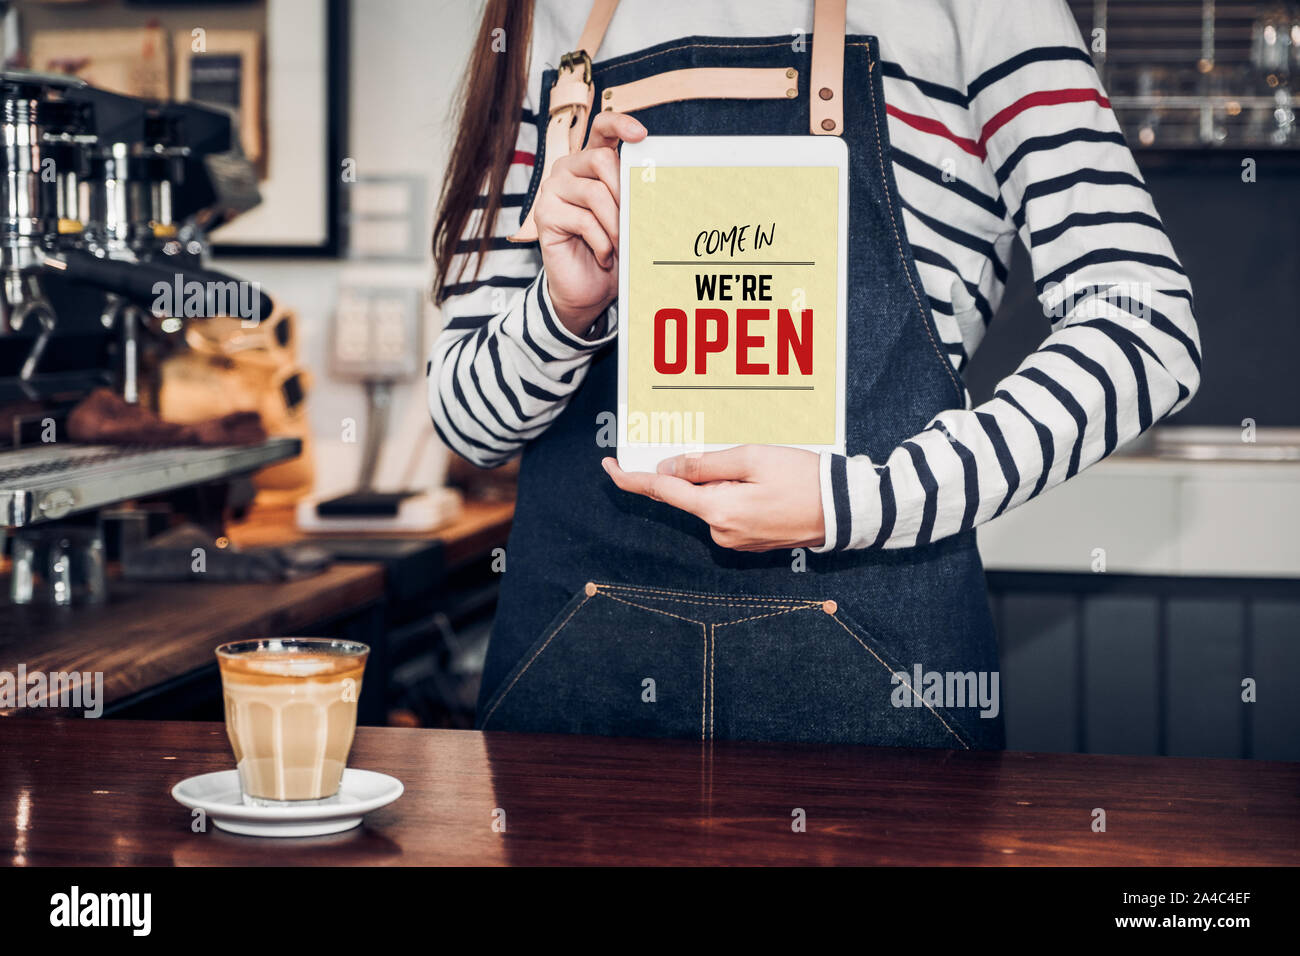 woman barista wear jean apron holding come in we are open sign on tablet to customer at bar counter with smile emotion,Cafe restaurant service concept Stock Photo